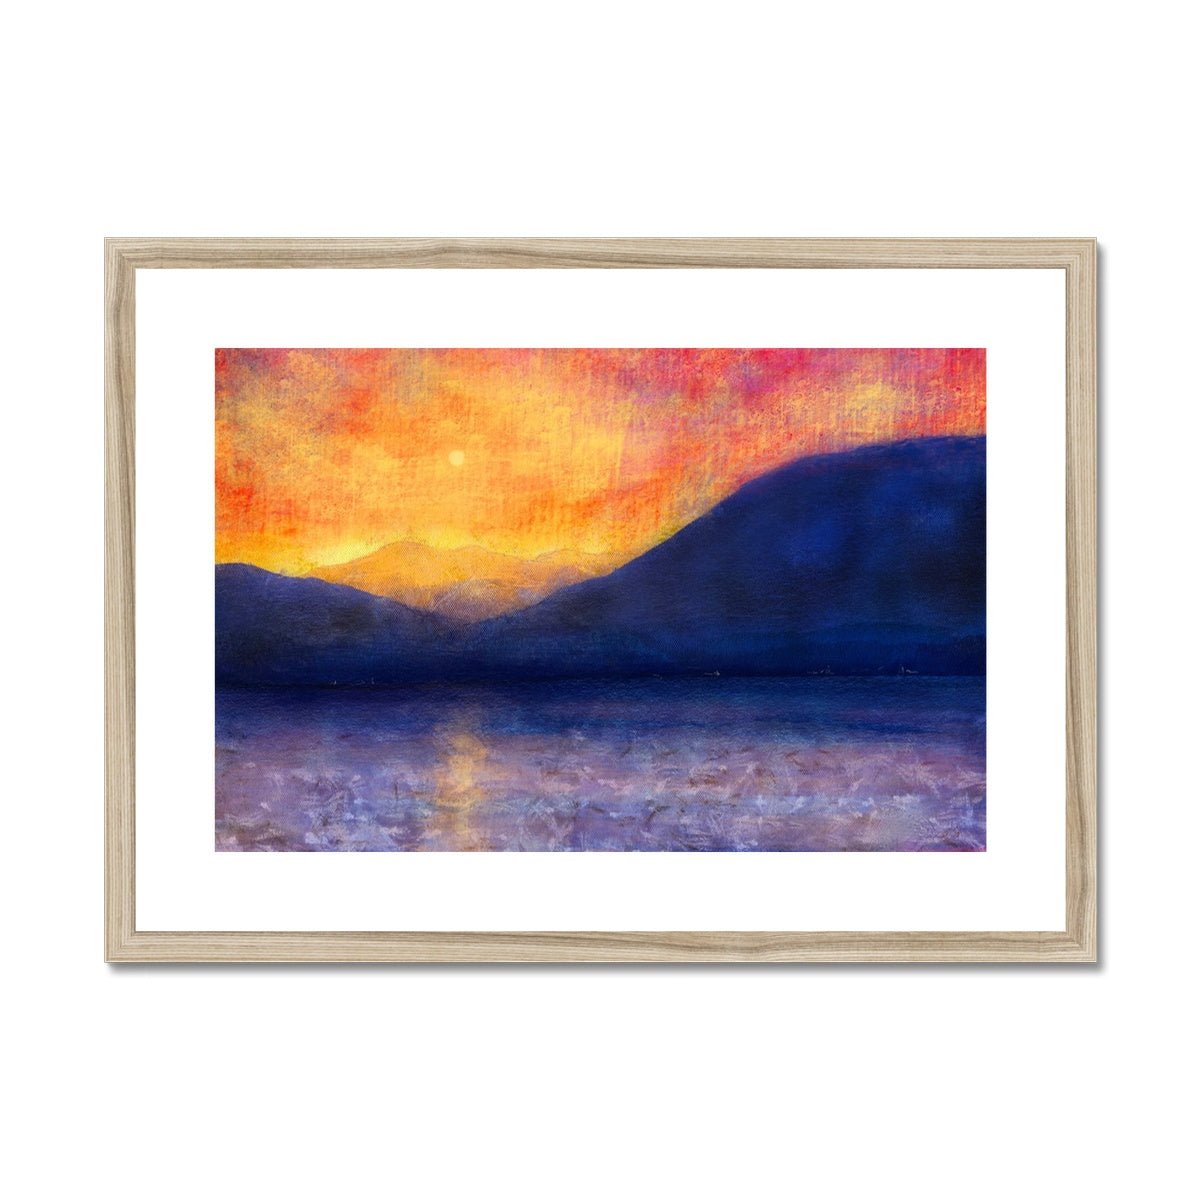 Sunset Approaching Mull Painting | Framed & Mounted Prints From Scotland-Framed & Mounted Prints-Hebridean Islands Art Gallery-A2 Landscape-Natural Frame-Paintings, Prints, Homeware, Art Gifts From Scotland By Scottish Artist Kevin Hunter